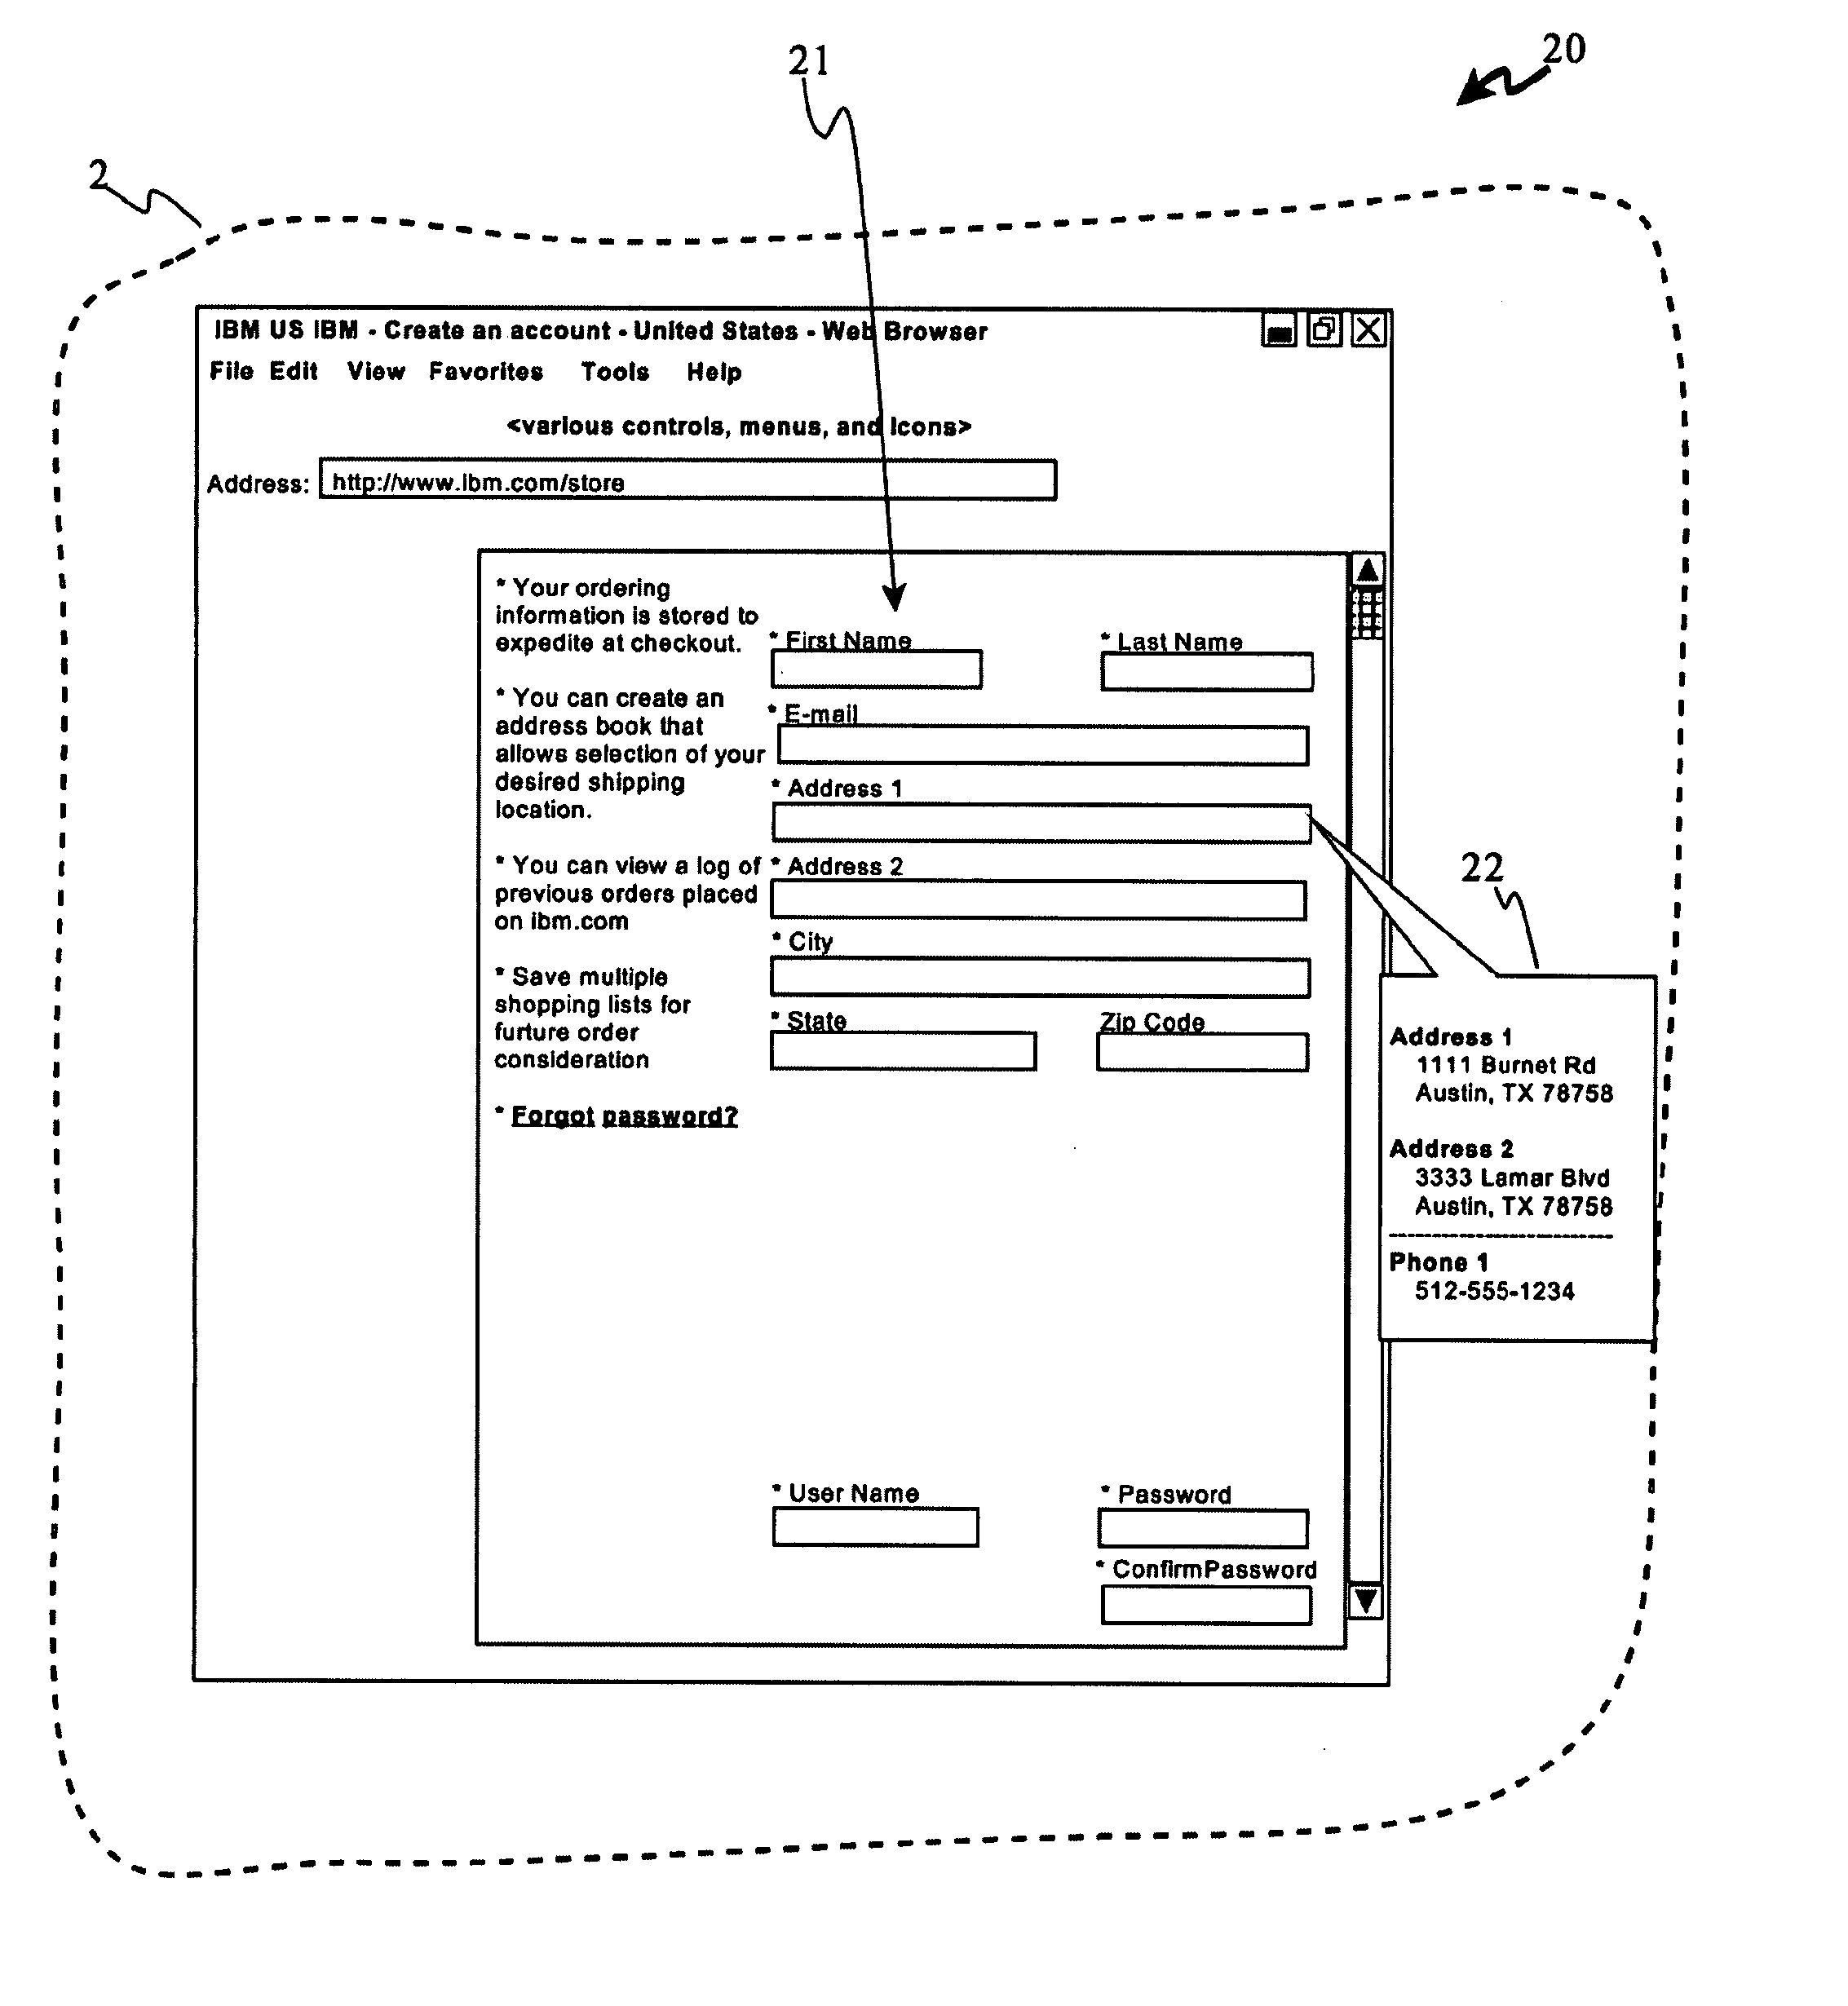 System and Method to Capture and Manage Input Values for Automatic Form Fill